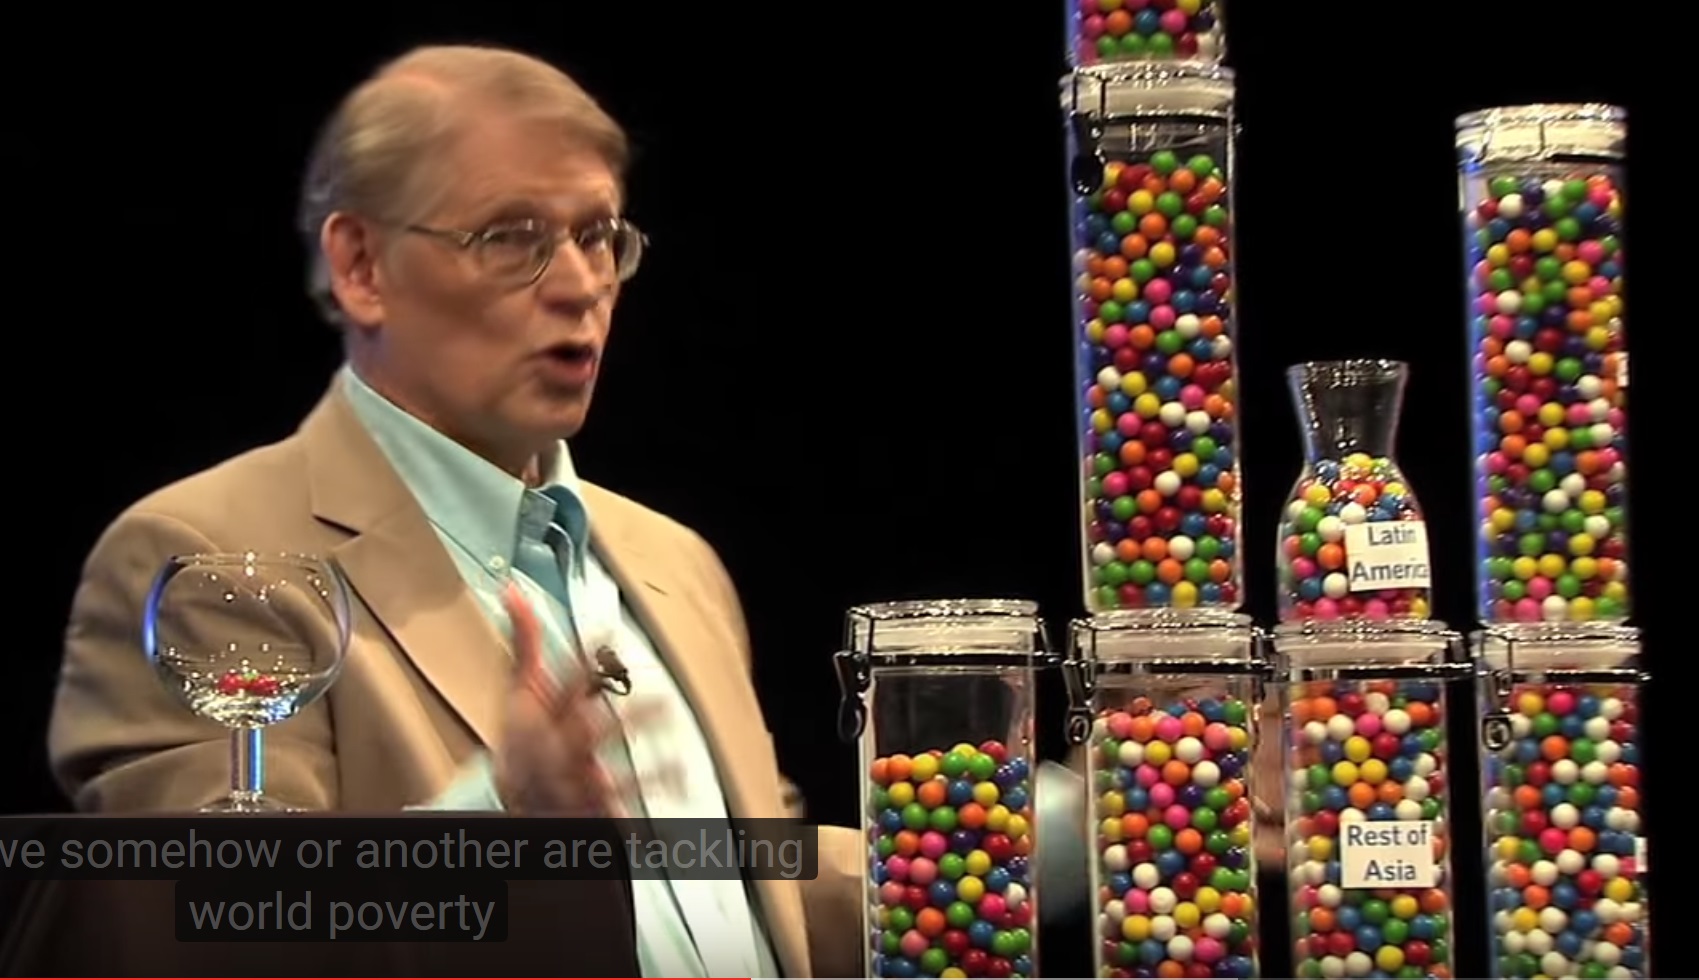 Image: Media’s totally false narrative about refugees demolished by simple visual demonstration involving GUMBALLS (video)